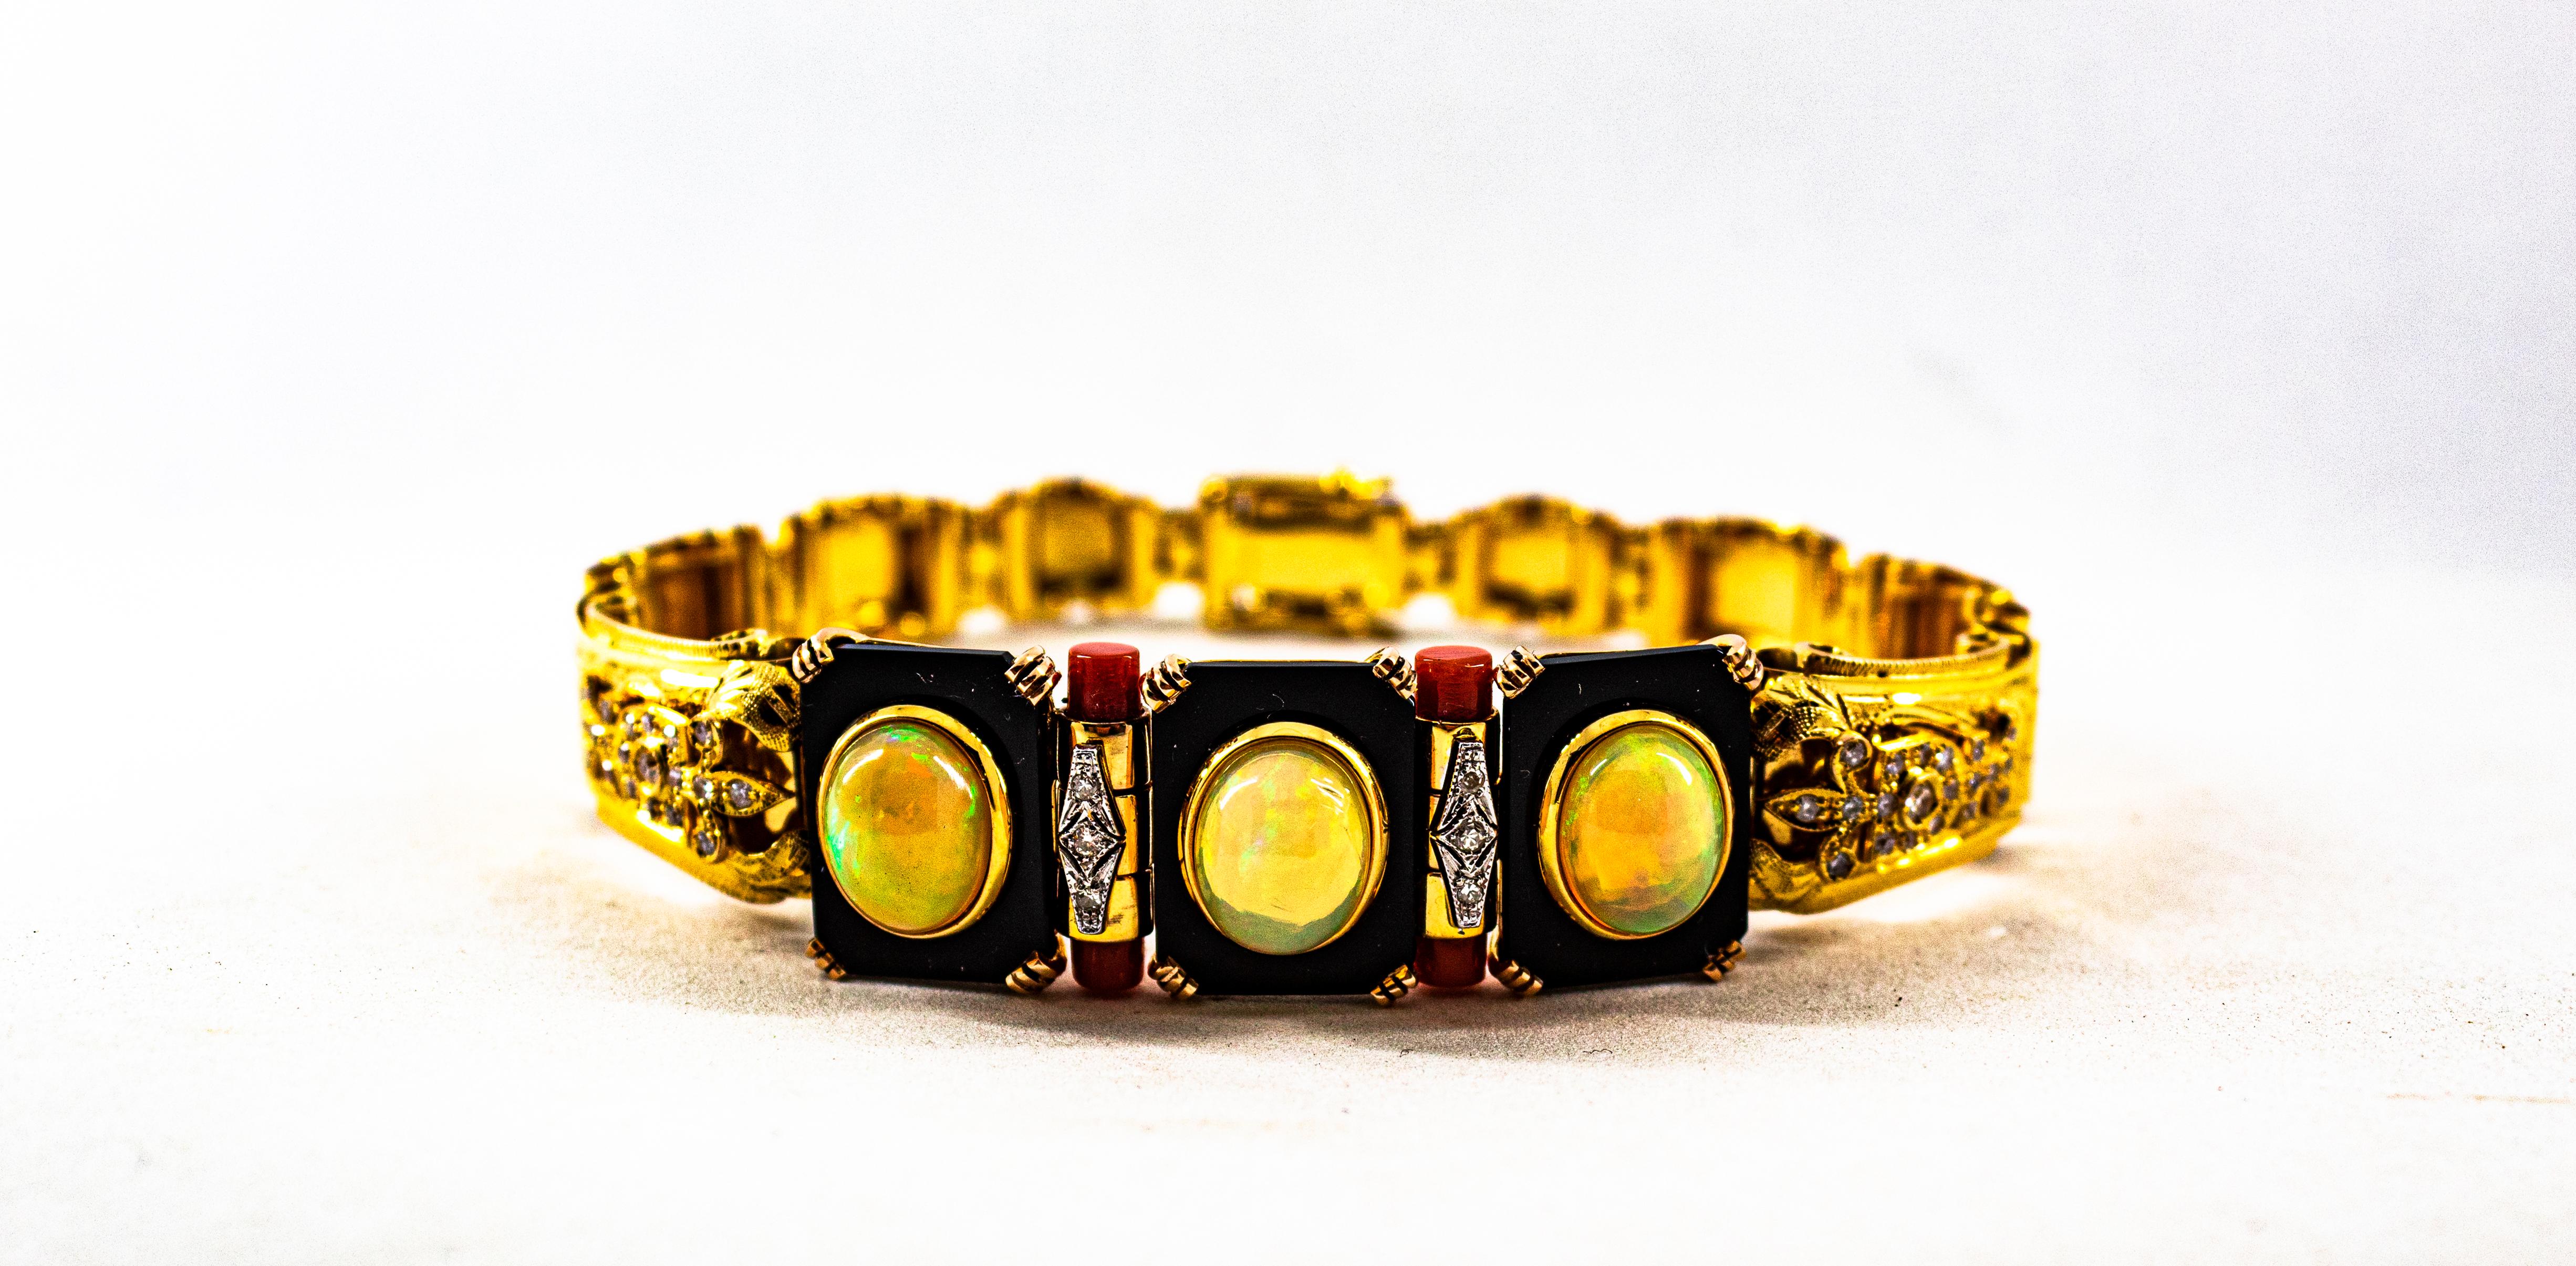 Art Deco Style 6.90 Carat White Diamond Opal Red Coral Onyx Yellow Gold Bracelet For Sale 1